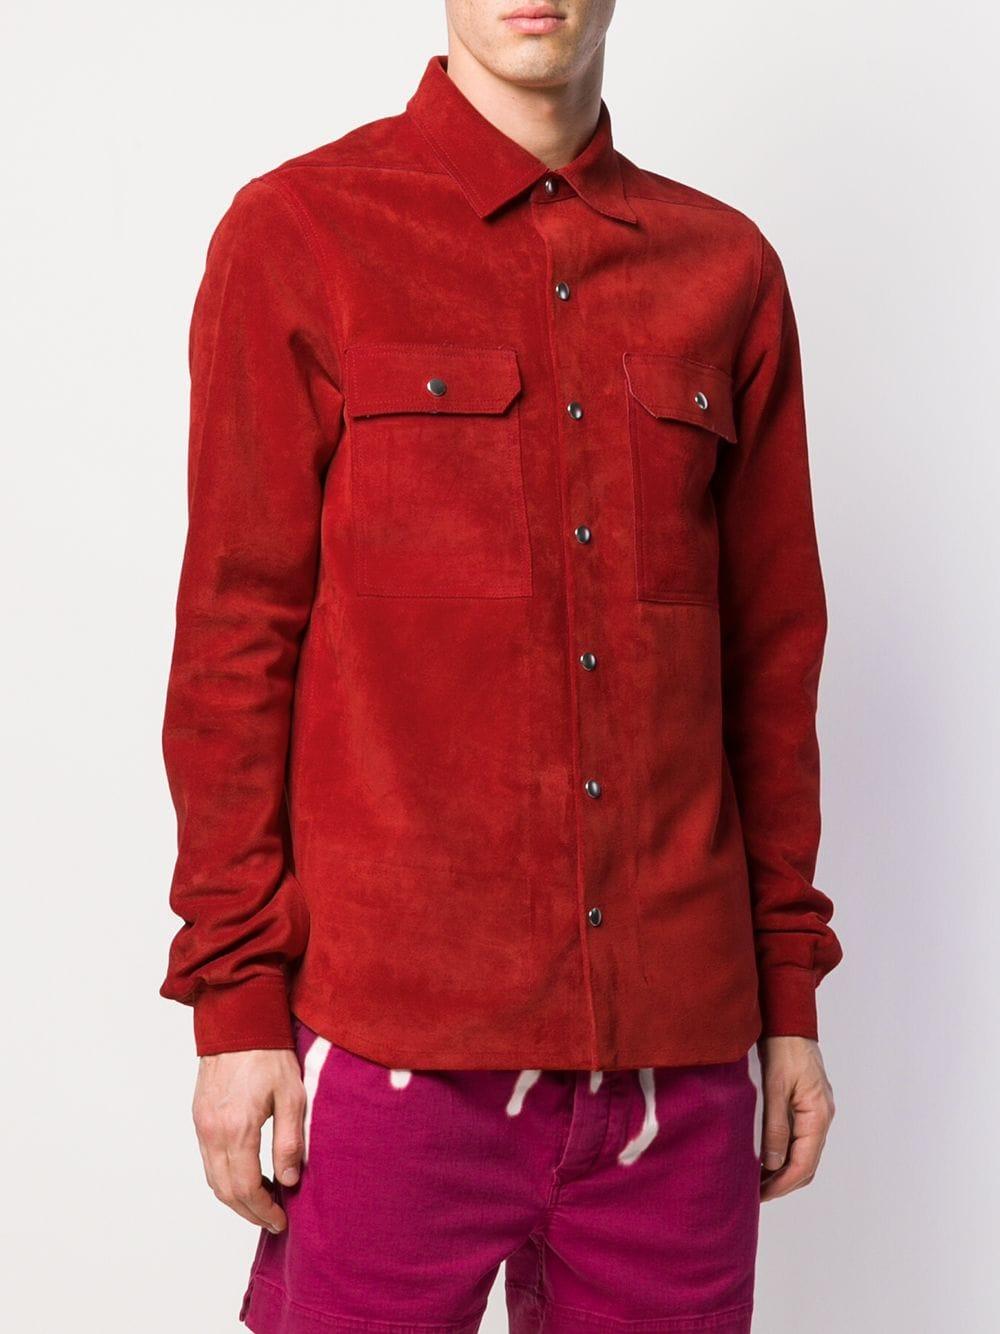 Rick Owens Front Pocket Shirt in Red for Men - Lyst